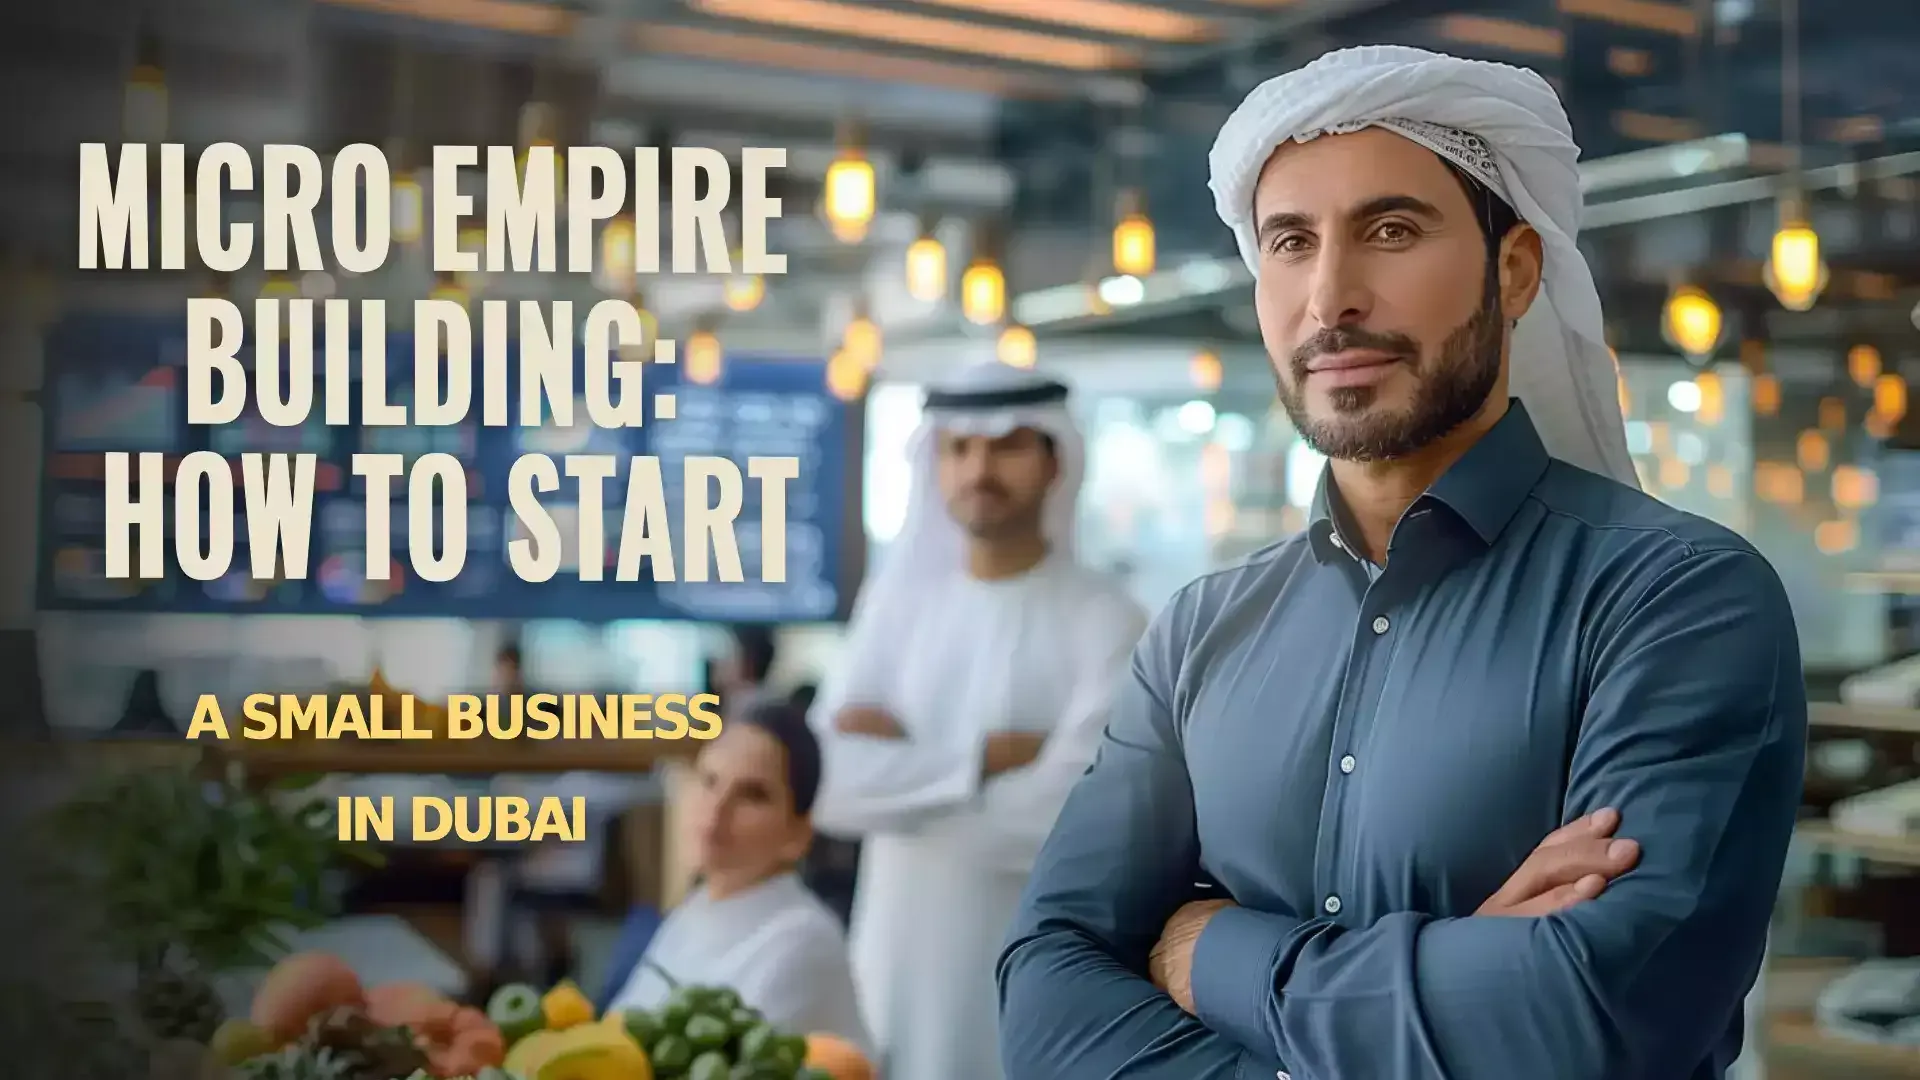 Starting a small business in Dubai - Step-by-step guide